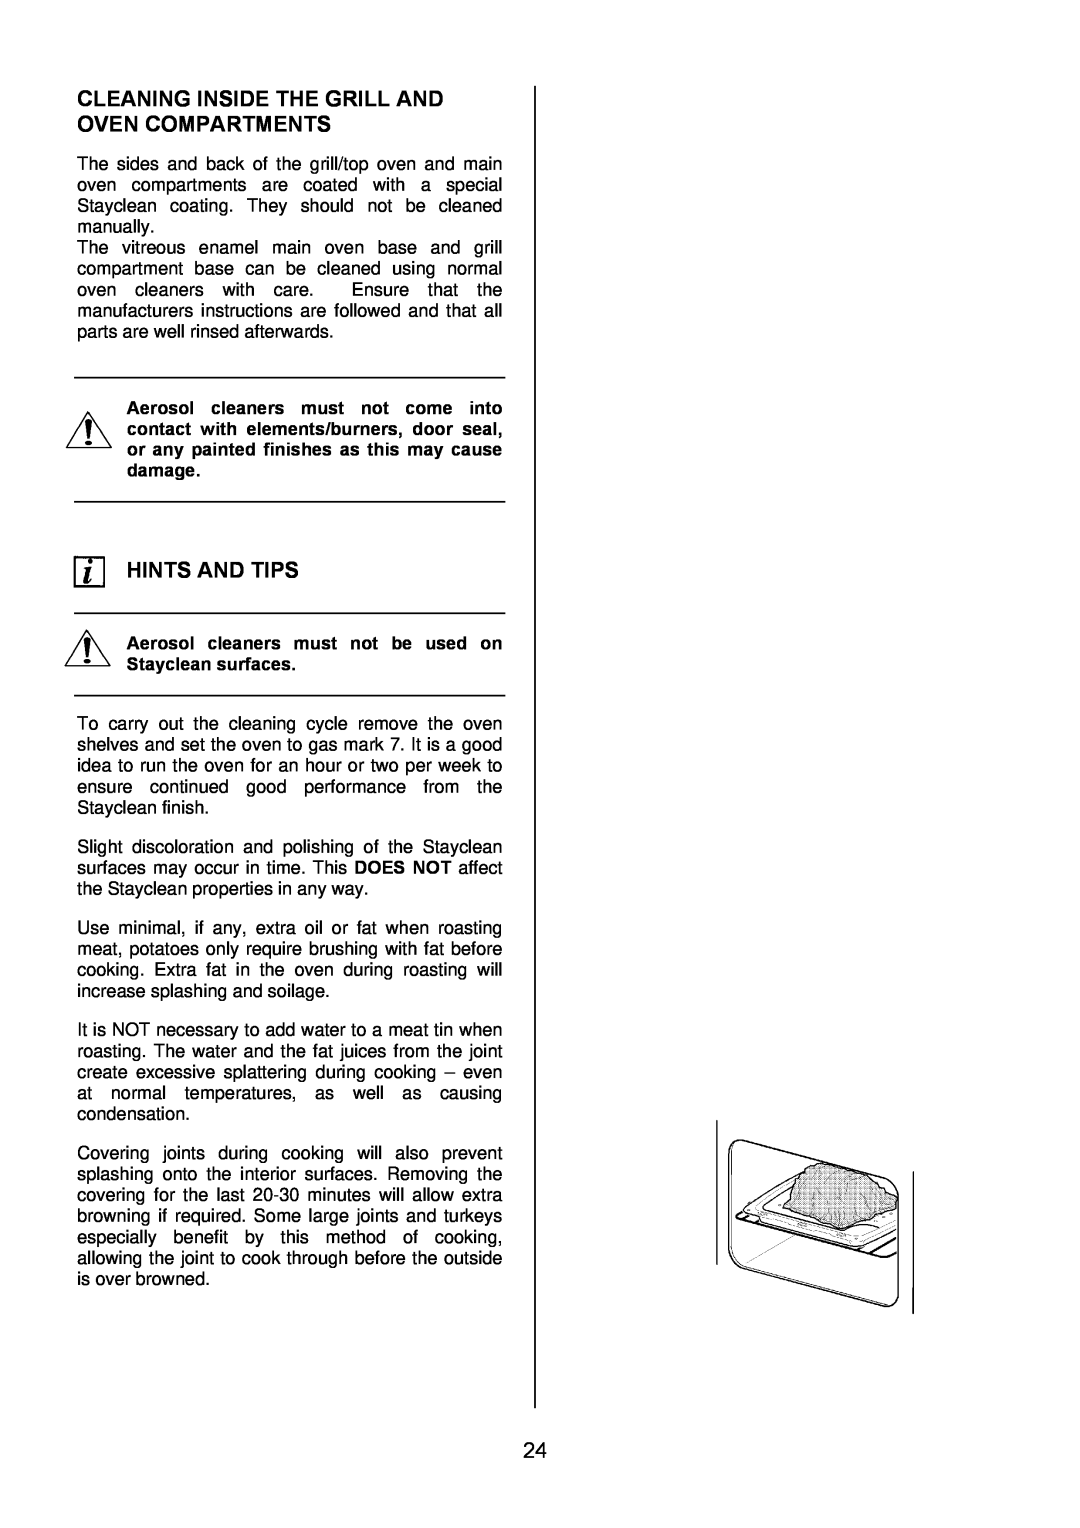 Electrolux EKG6046/EKG6047 manual Cleaning Inside The Grill And Oven Compartments, Hints And Tips 